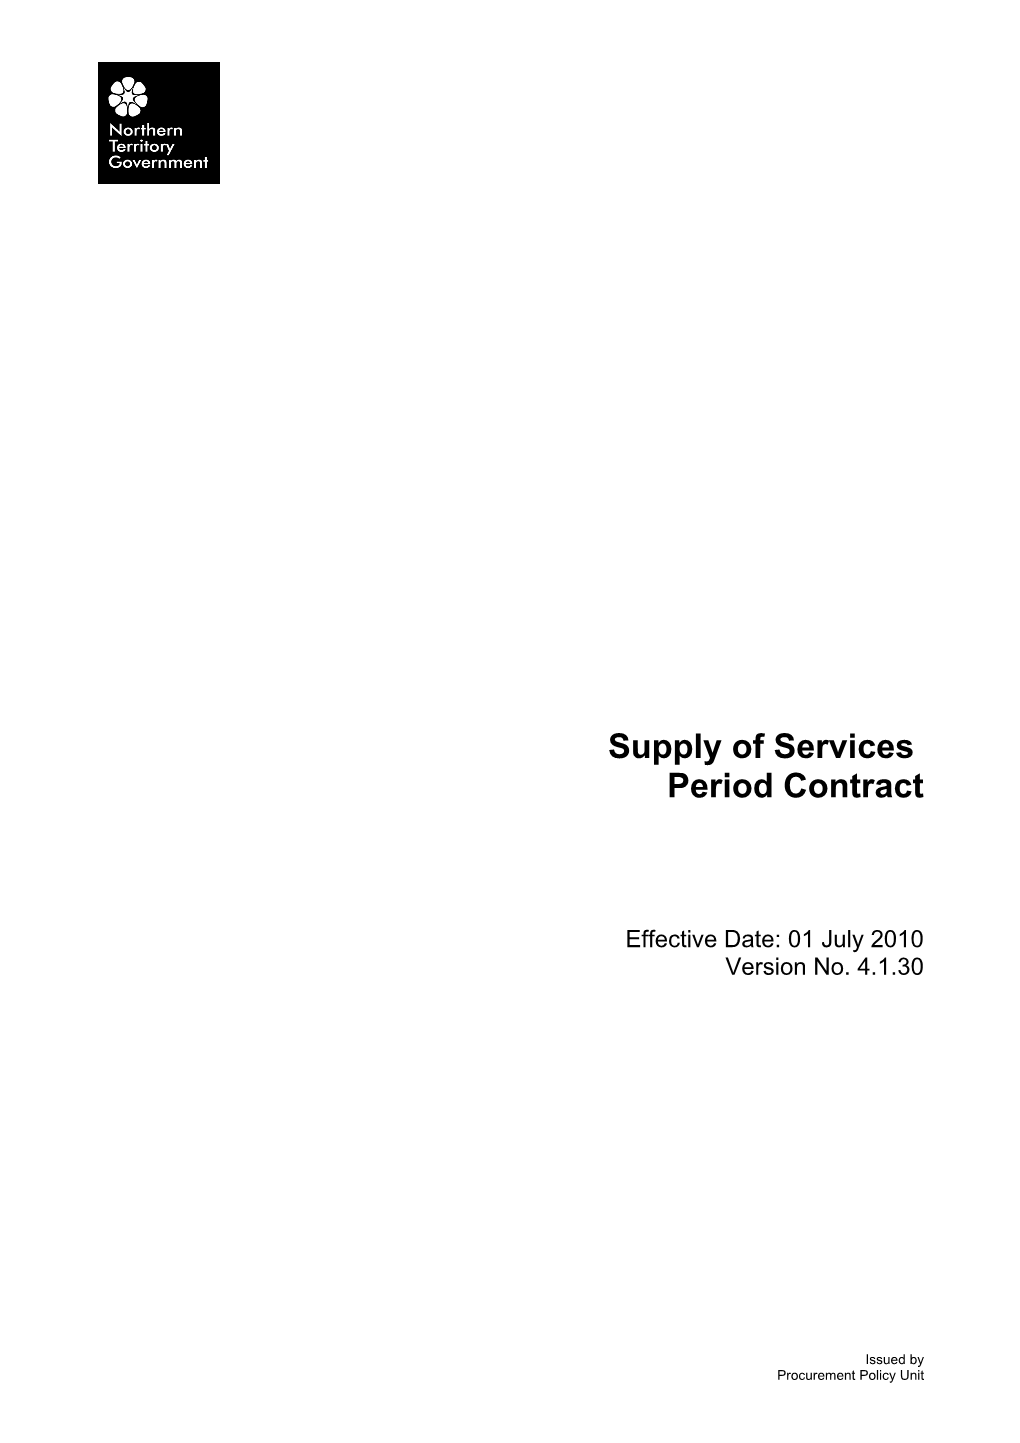 Supply of Services Period - V 4.1.30 (01 July 2010)